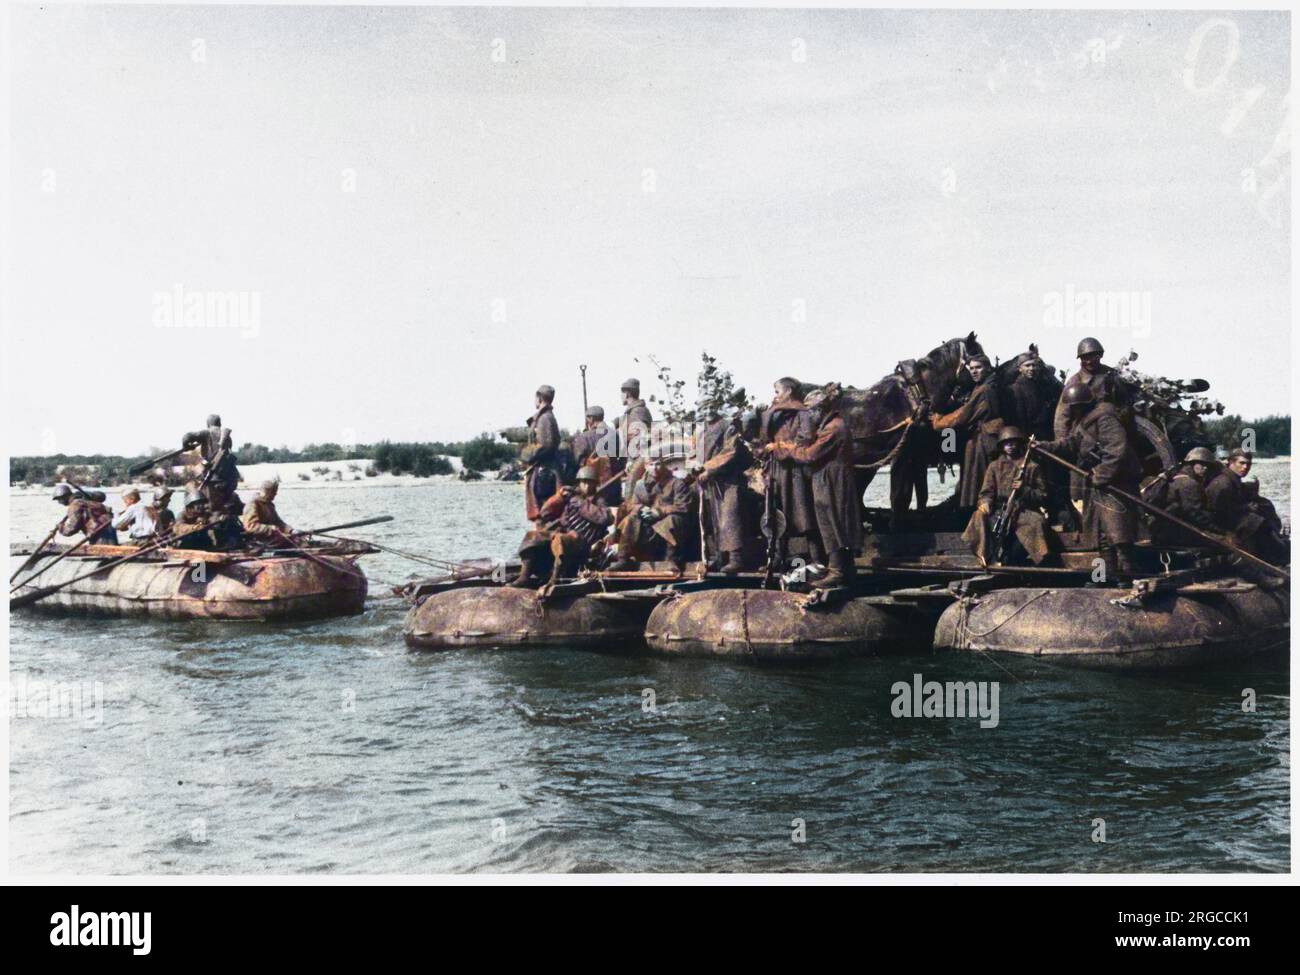 Soviet support troops cross the Volga by raft. Stock Photo